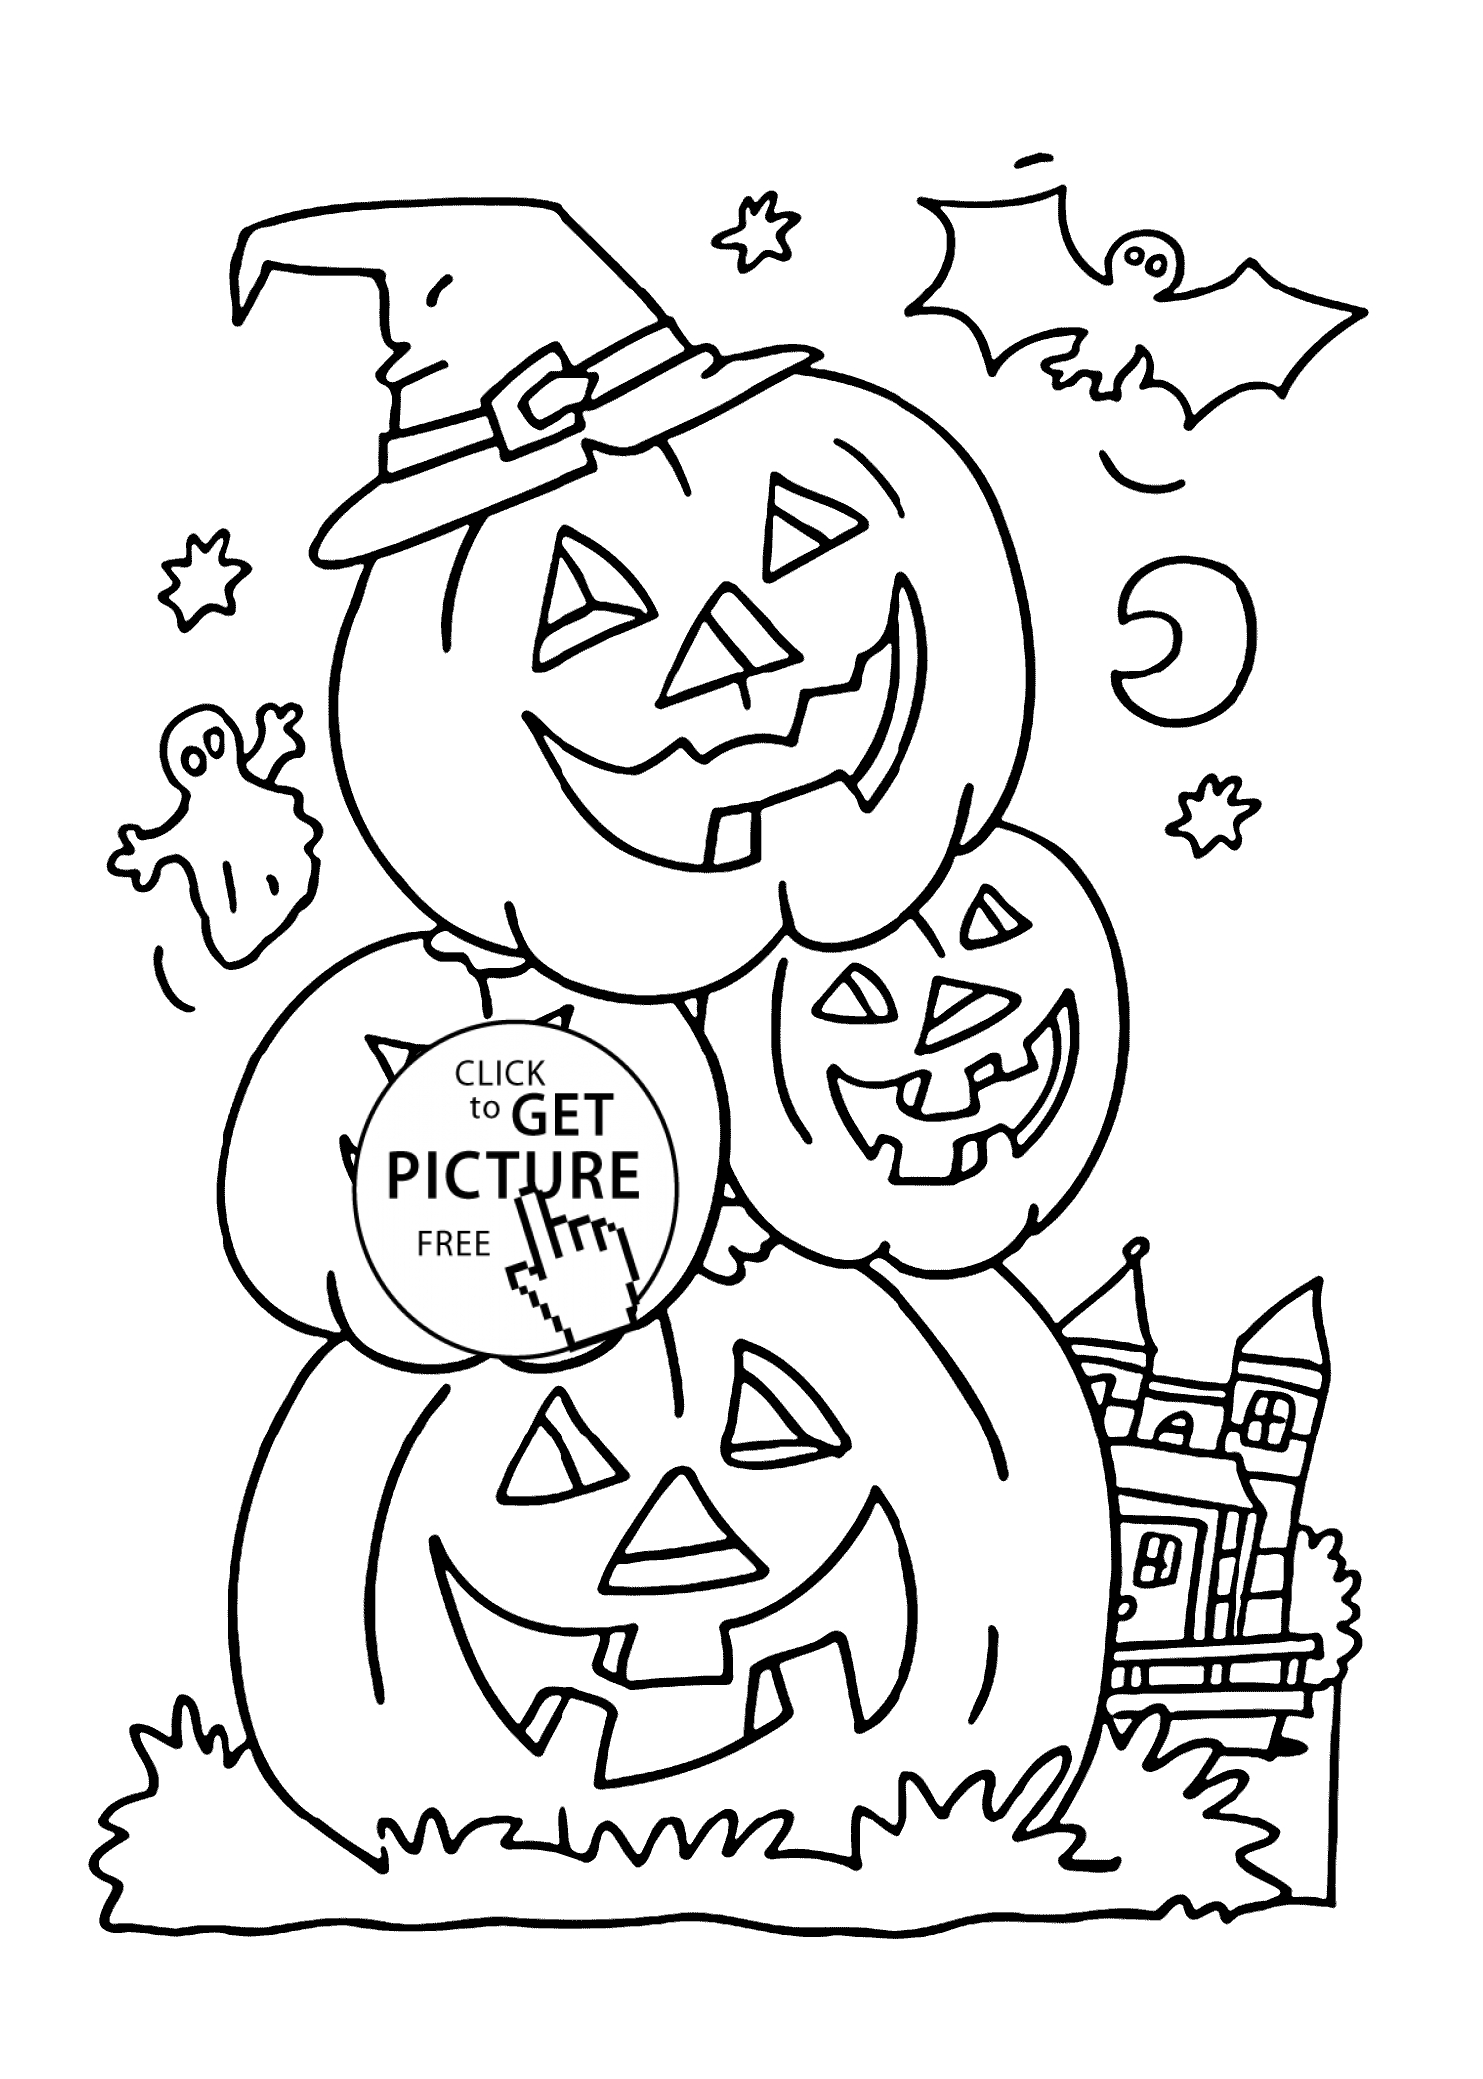 Halloween Pumpkin Coloring Pages Printables Halloween Pumpkins Coloring Page For Kids Printable Free